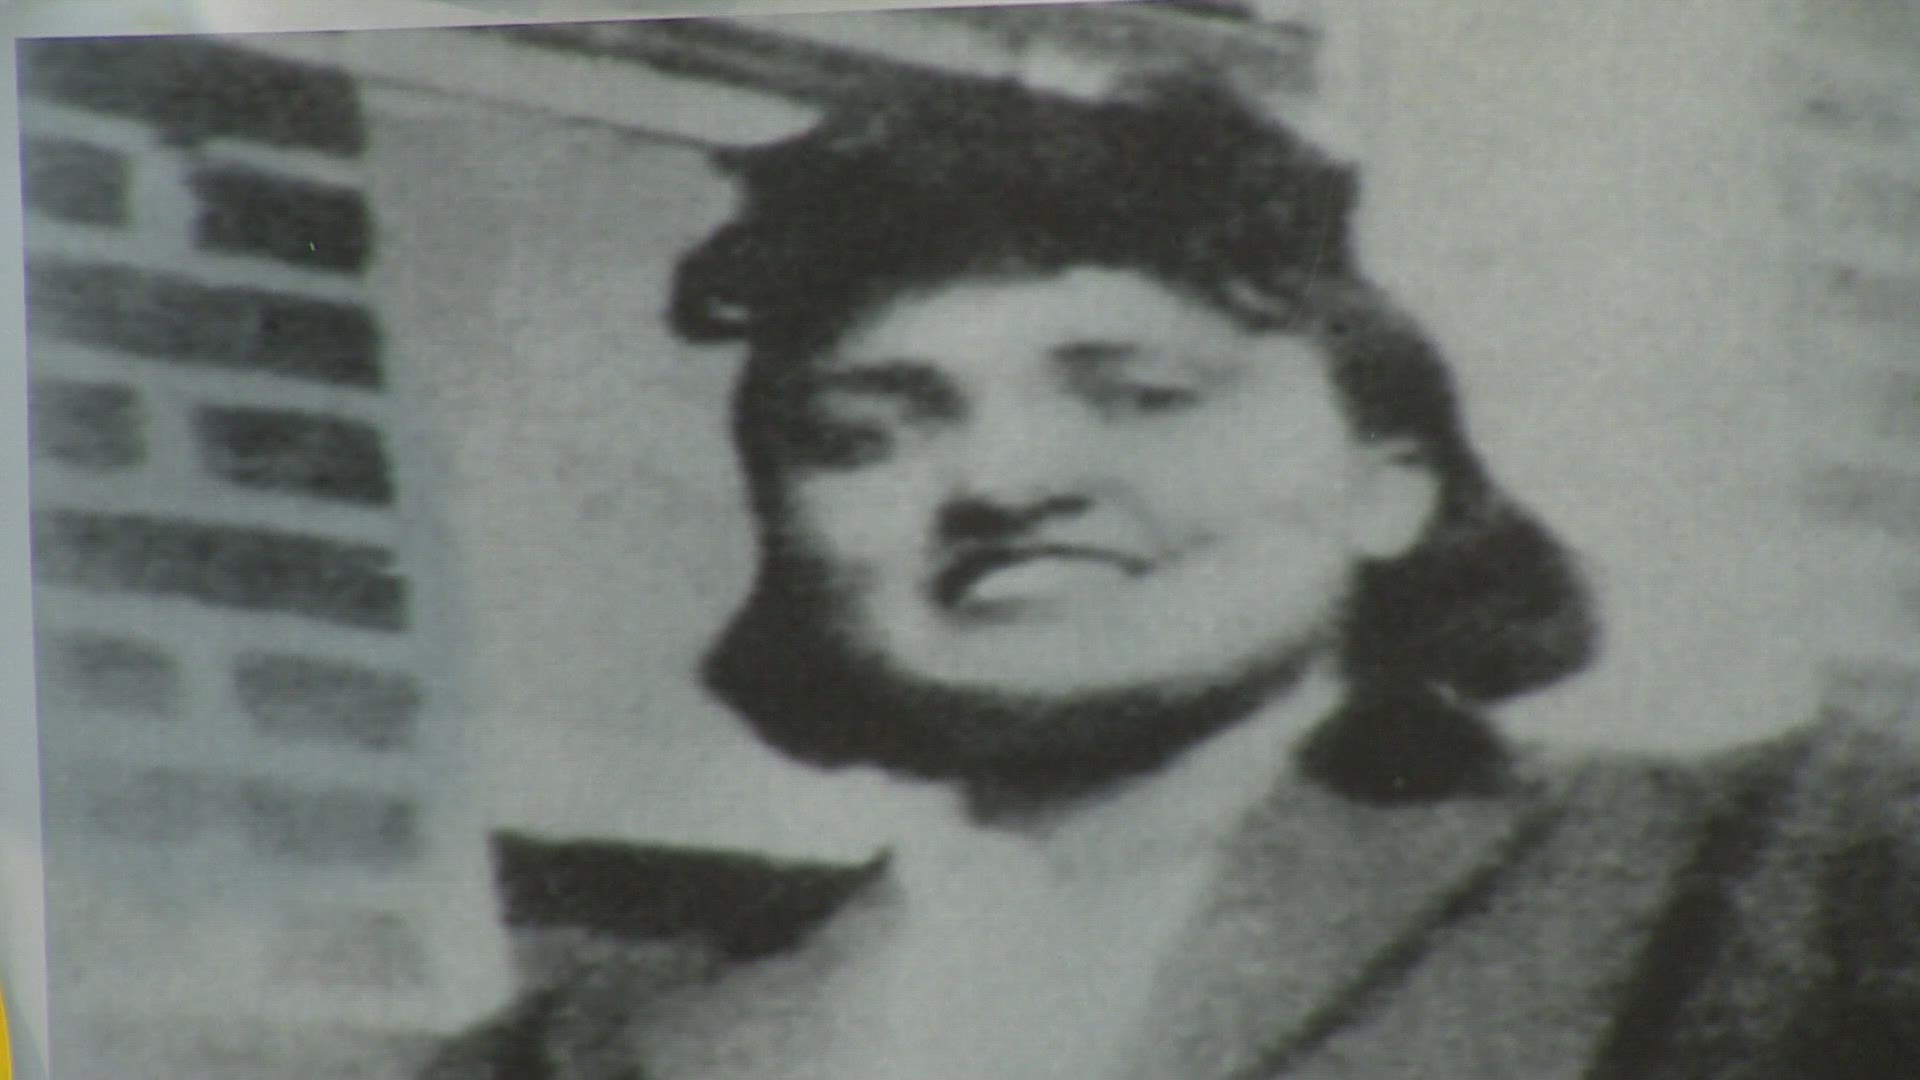 Henrietta Lacks' cervical cancer tissue cells were taken without her knowledge or consent in 1951. Her cells have been used for other treatments for decades.